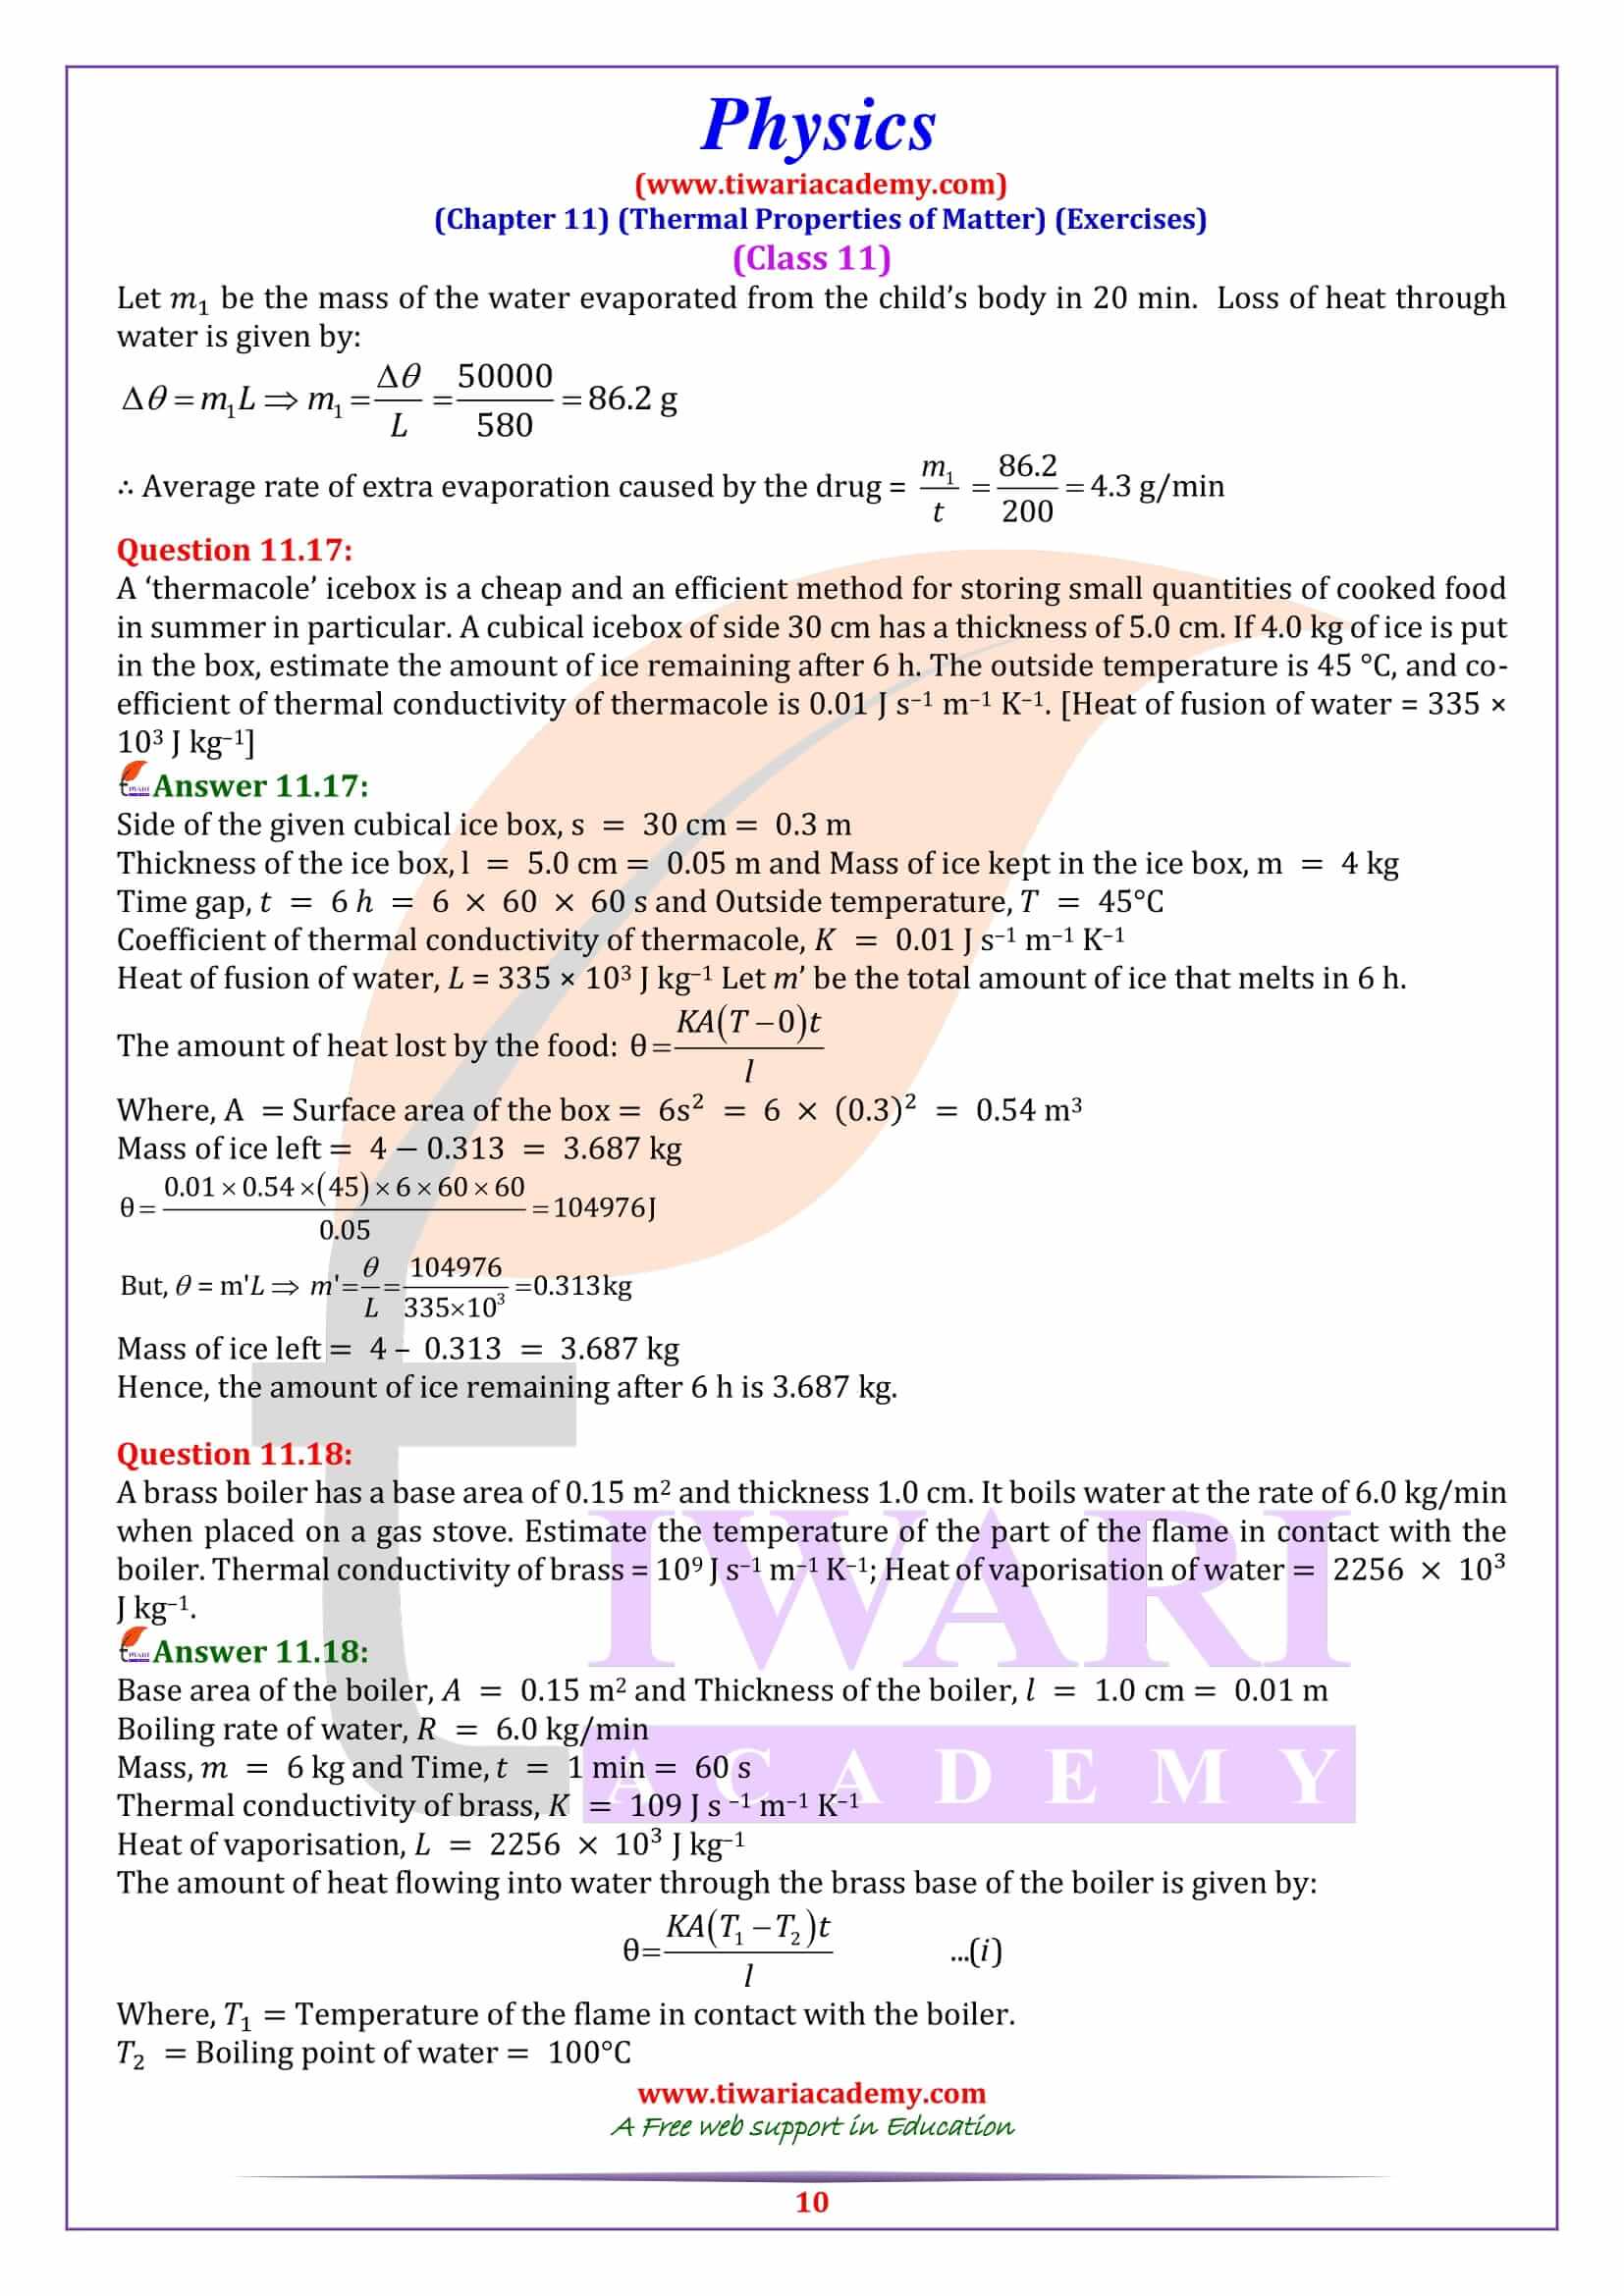 Class 11 Physics Chapter 11 exercises answers